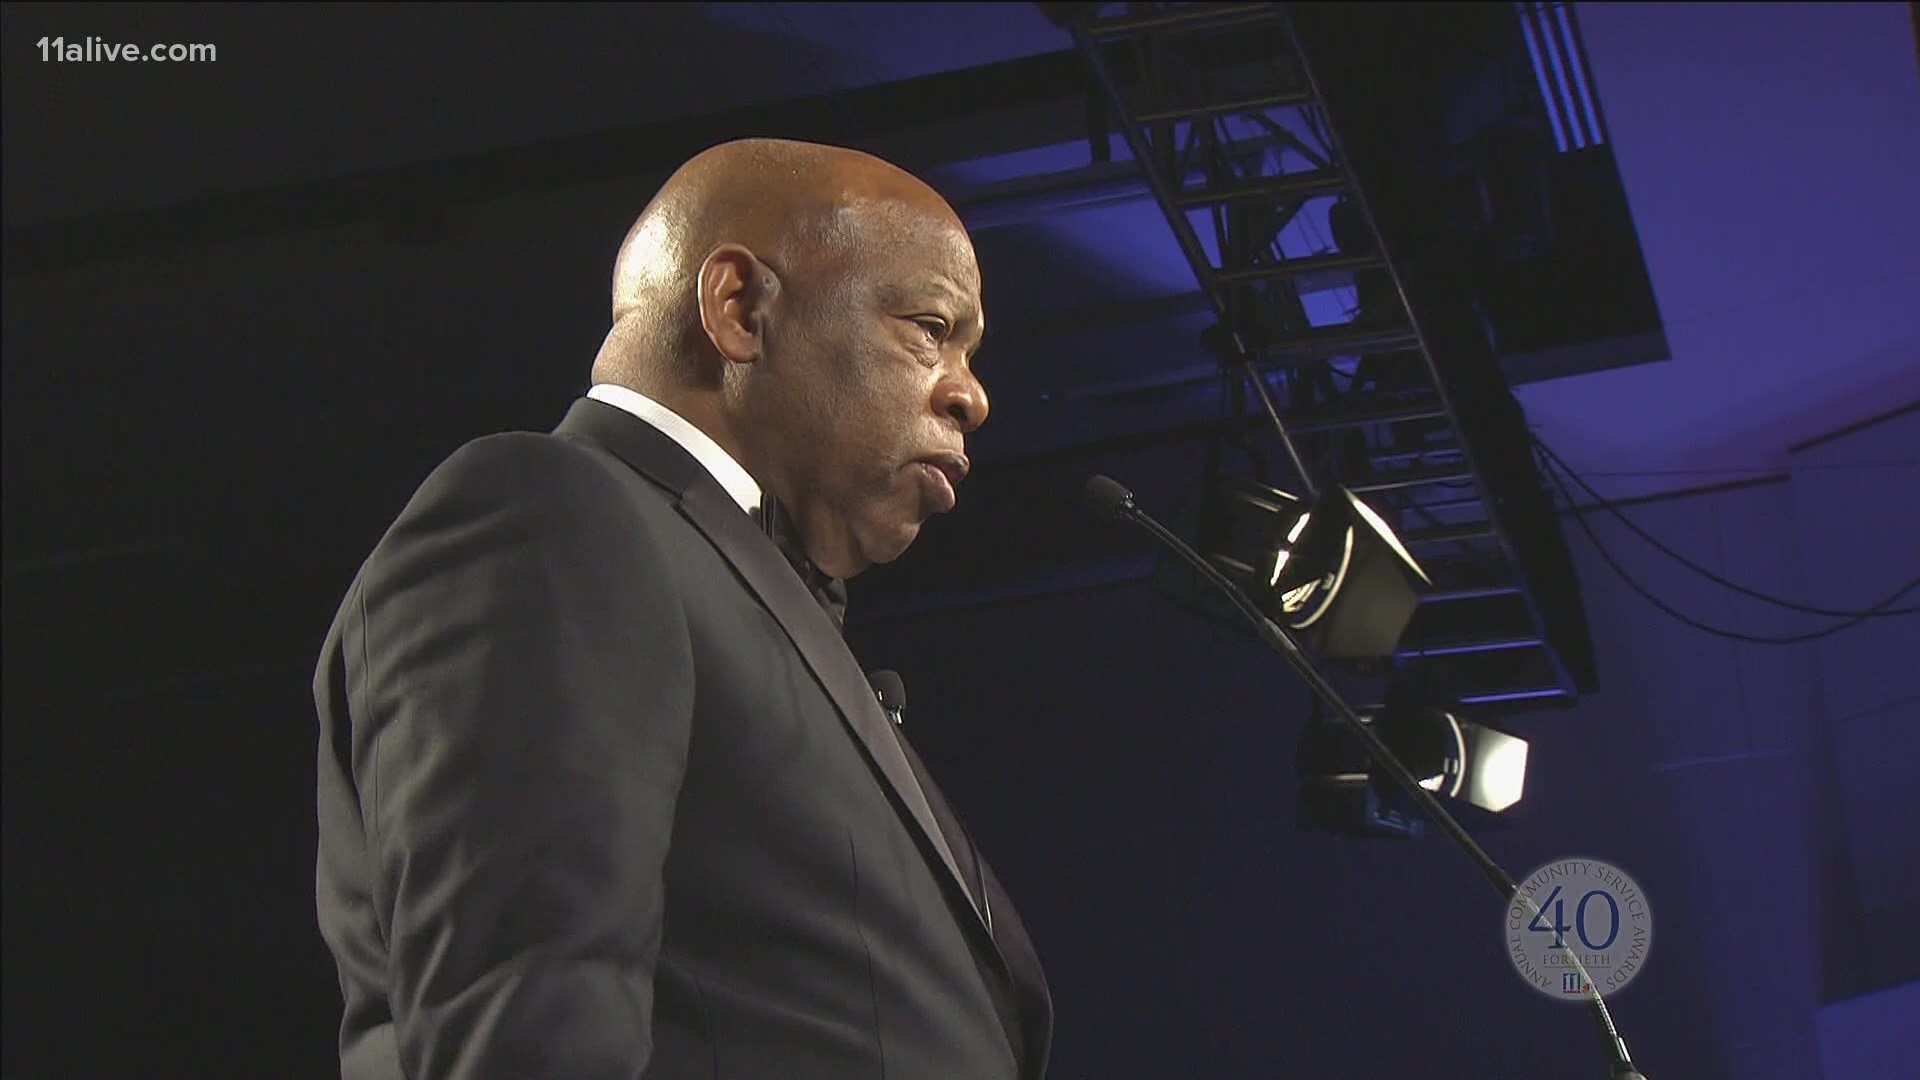 In 2015, 11Alive honored John Lewis at our Community Service Awards.